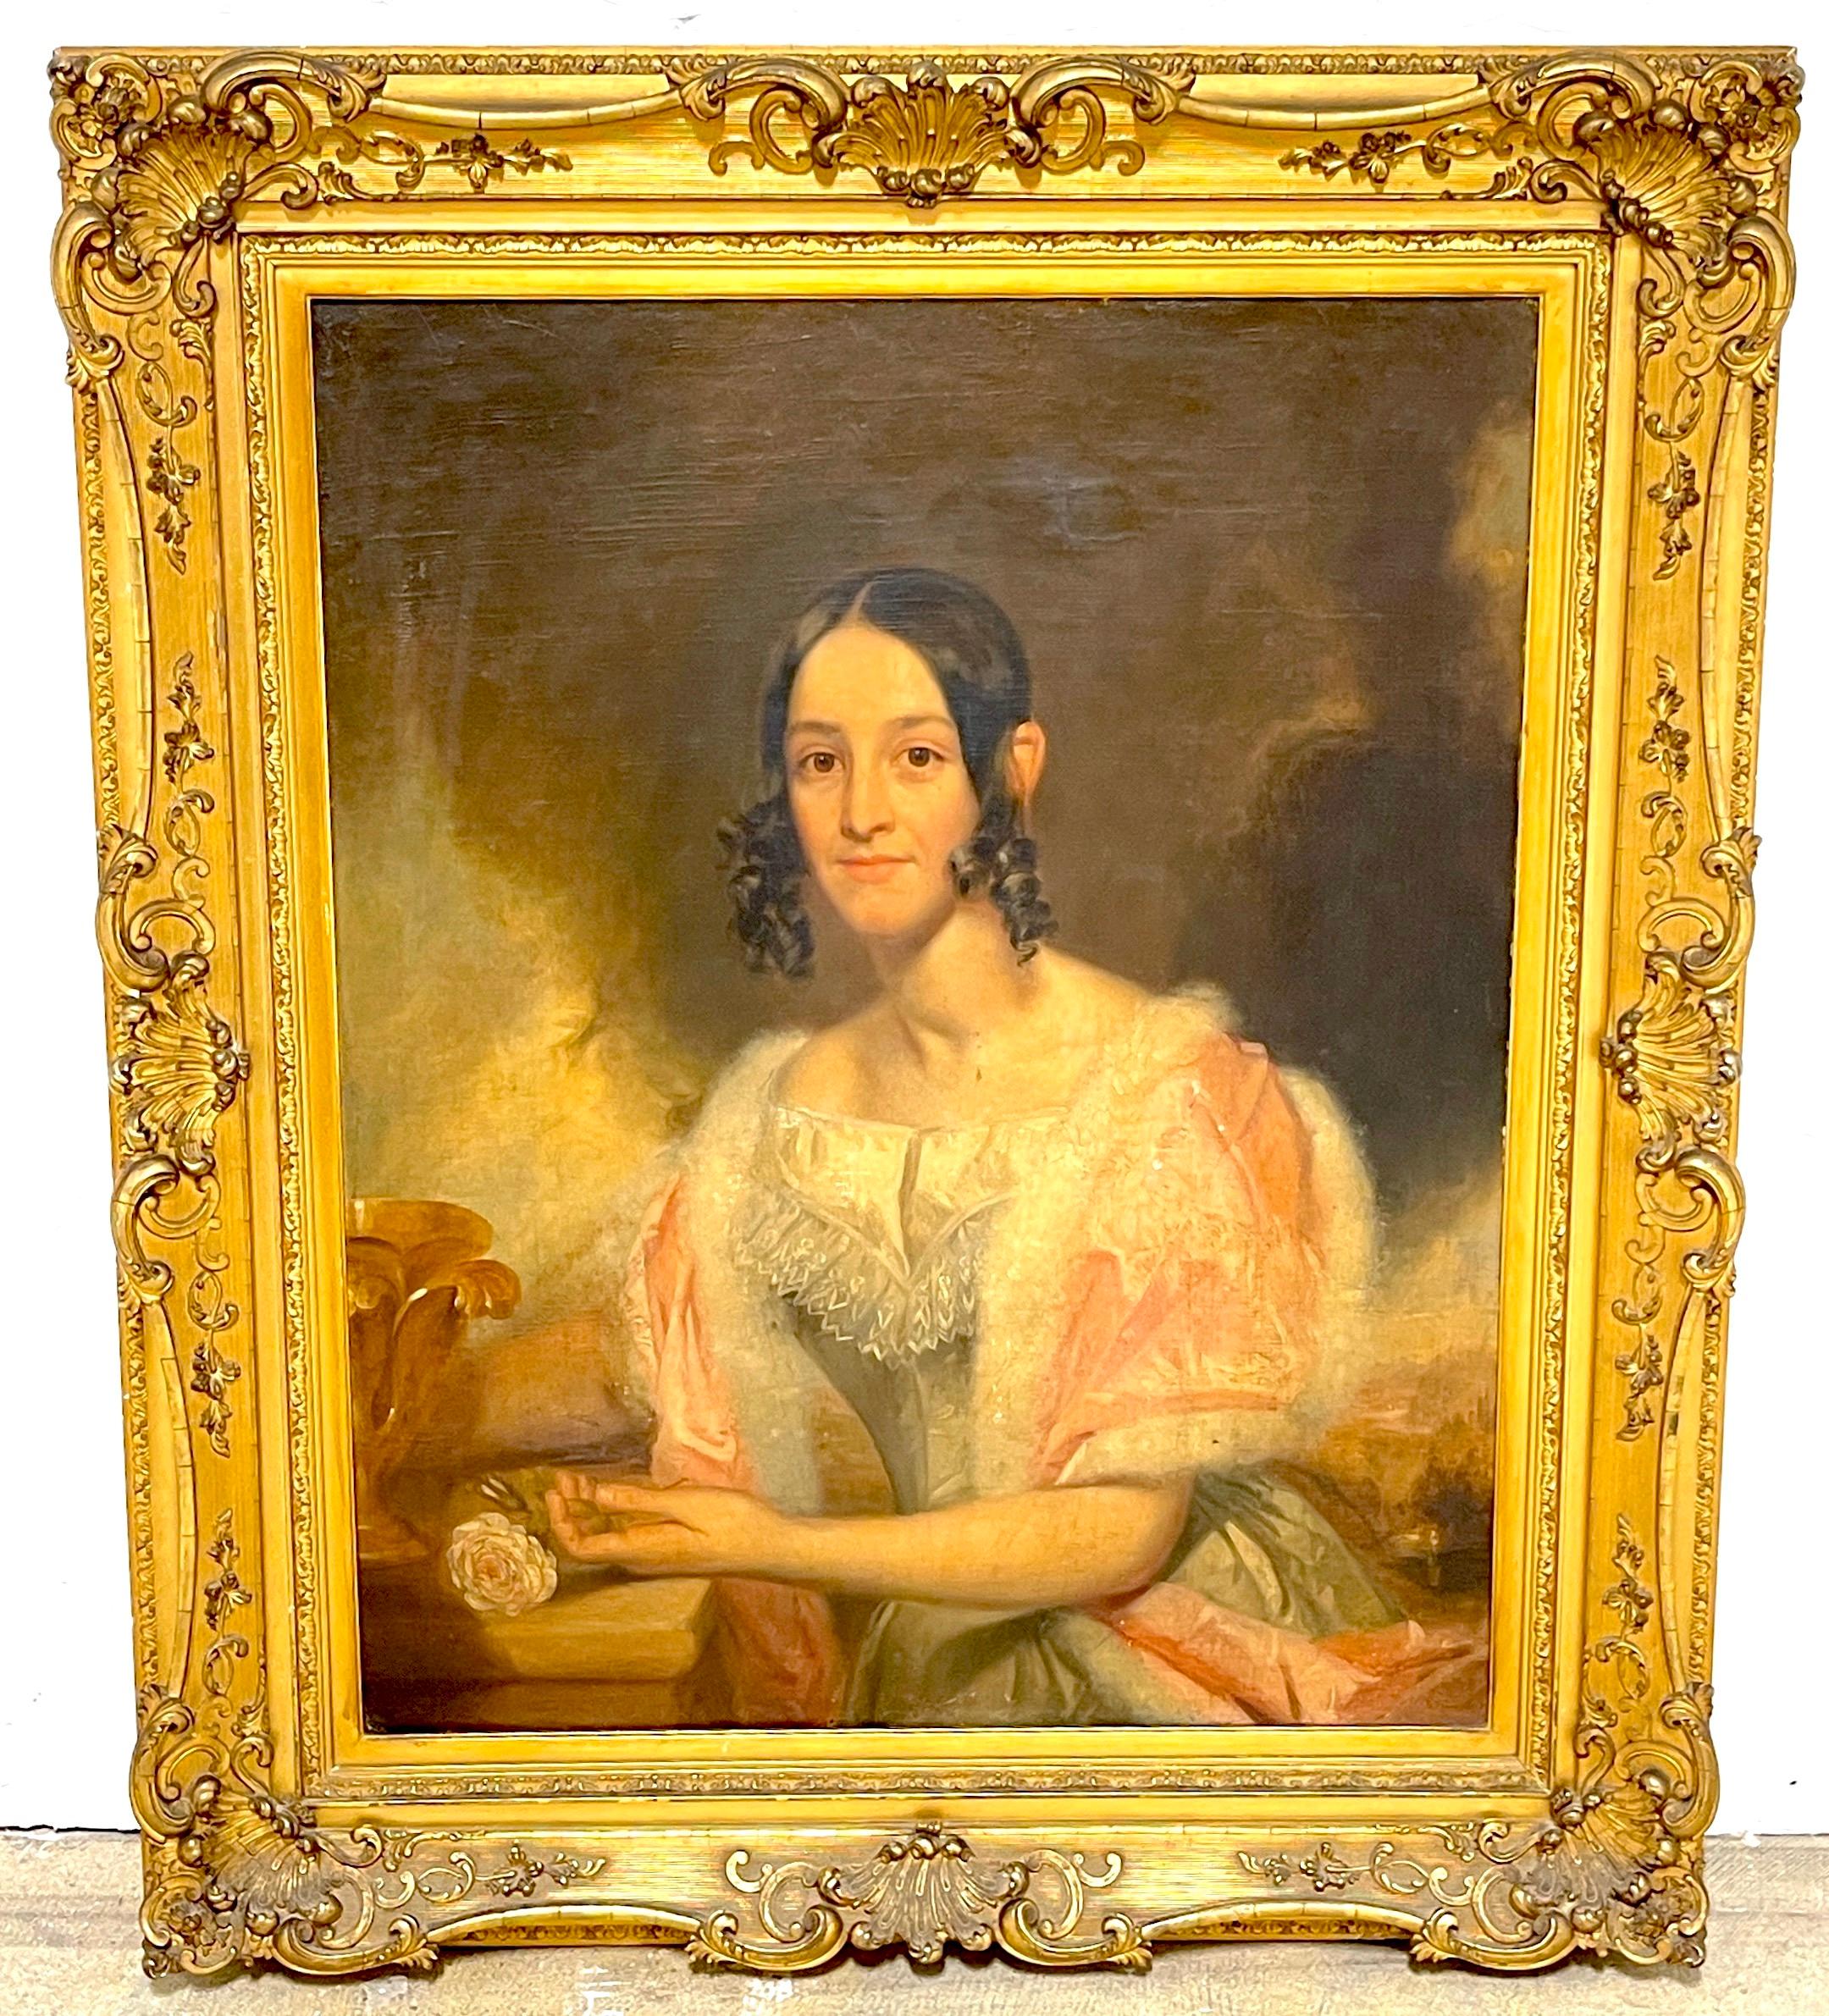 19th Century American Antebellum Portrait of a Lady, Original Giltwood Frame 
Oil on Canvas 36-inches high x 30-inches wide 
Apparently Unsigned 
USA, Circa 1850s

This 19th-century American antebellum portrait of a lady is a captivating piece of